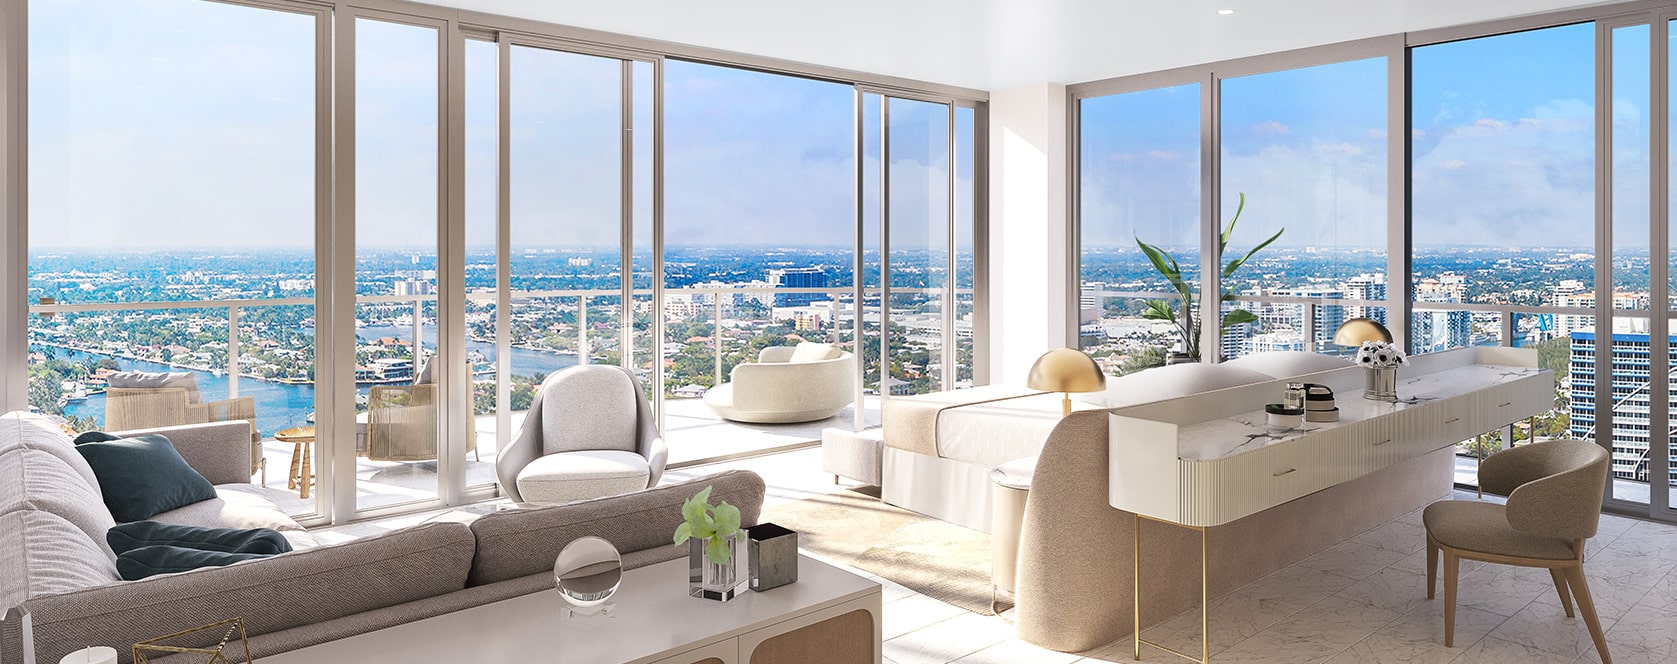 interior rendering of great room with views